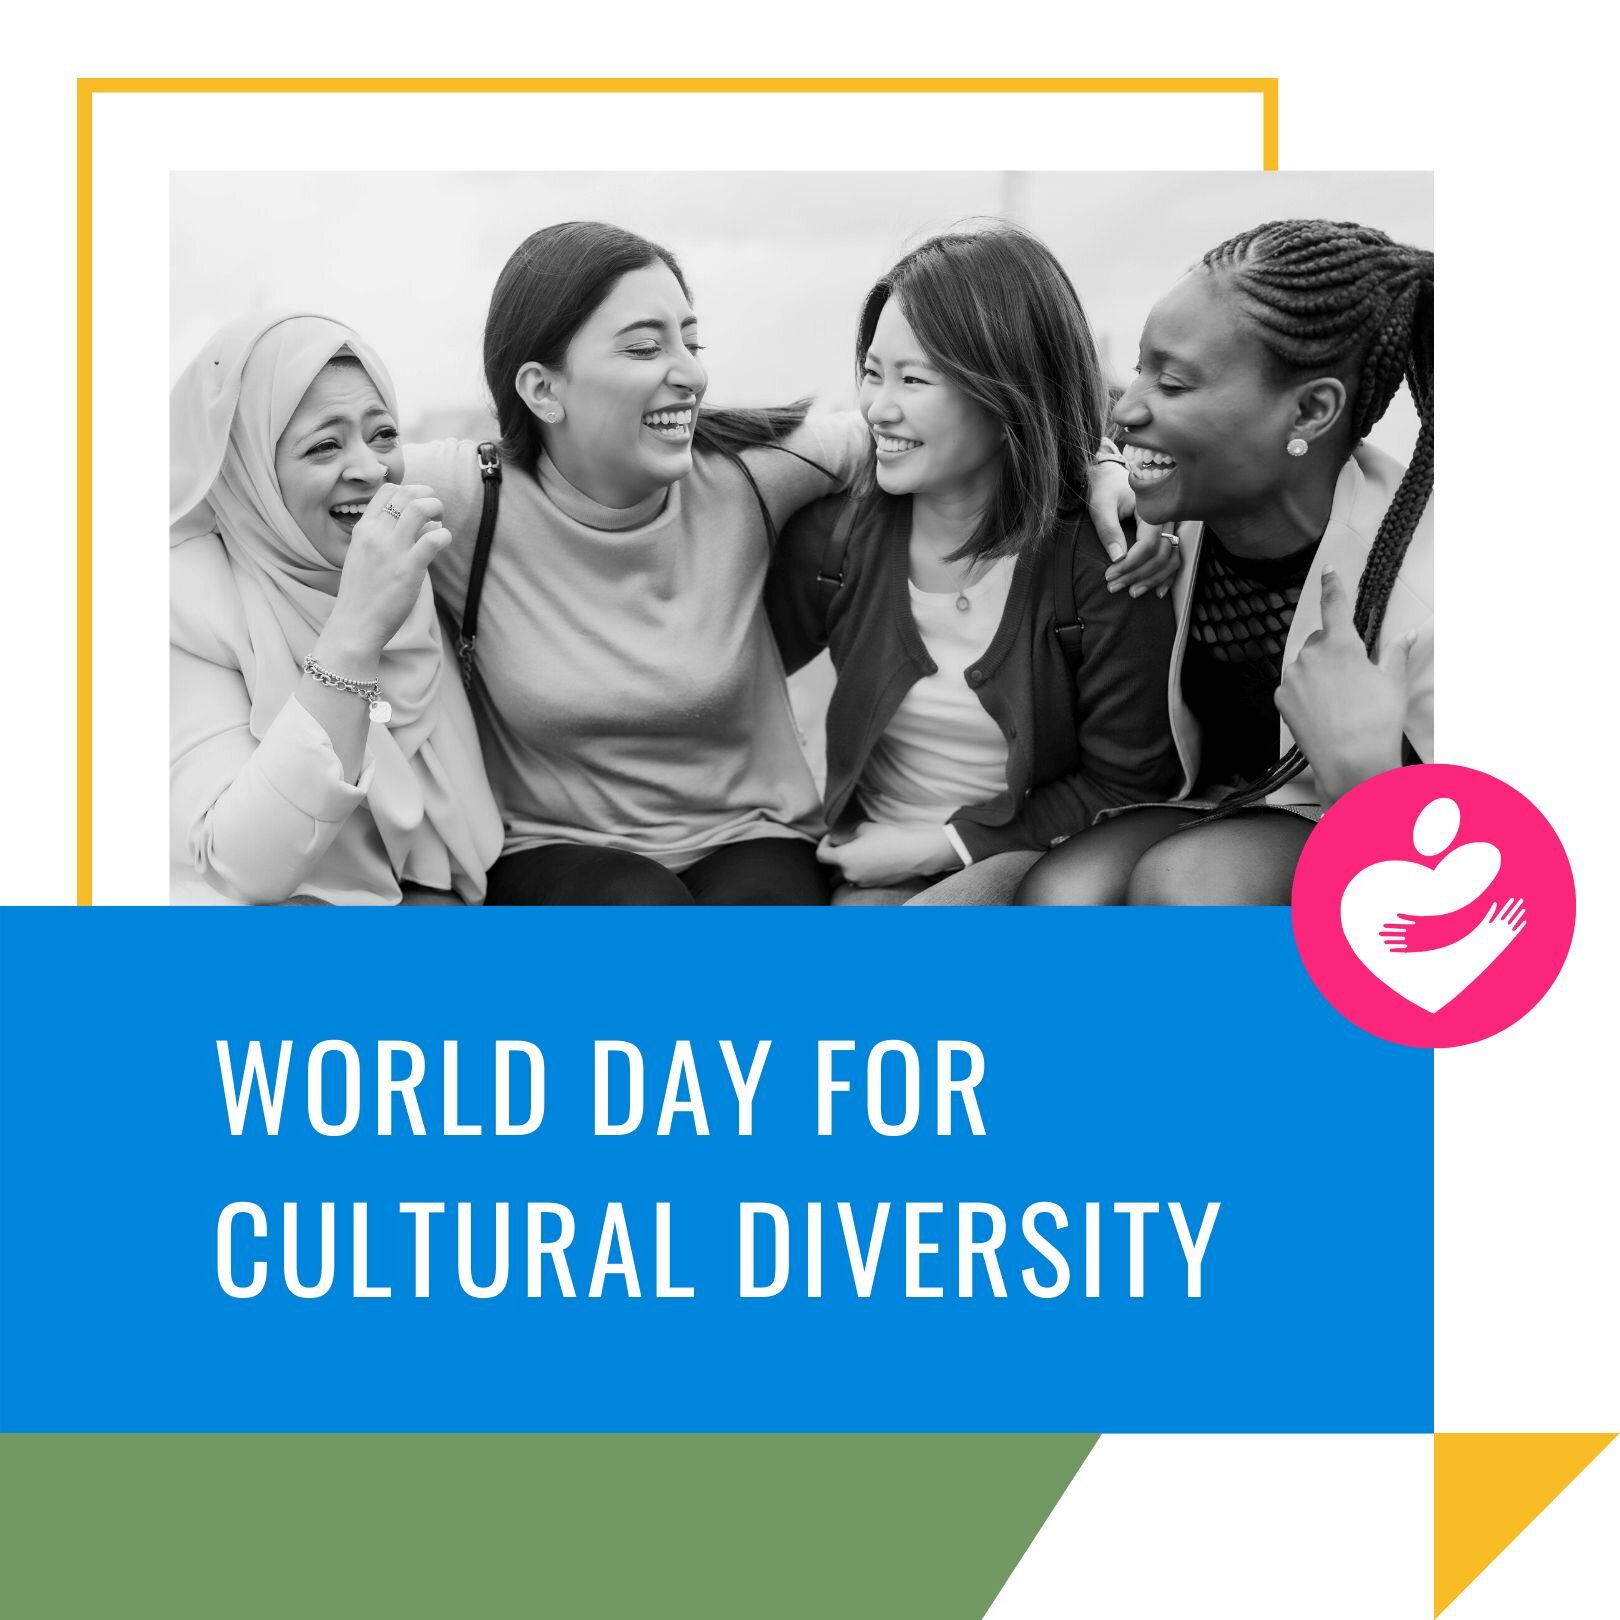 As a network, #CommunityAction believes that all people should be treated with dignity and respect. But today we remind ourselves to strive for more than just tolerance; let&rsquo;s strive for caring, compassion, and love. #WorldDayForCulturalDiversi